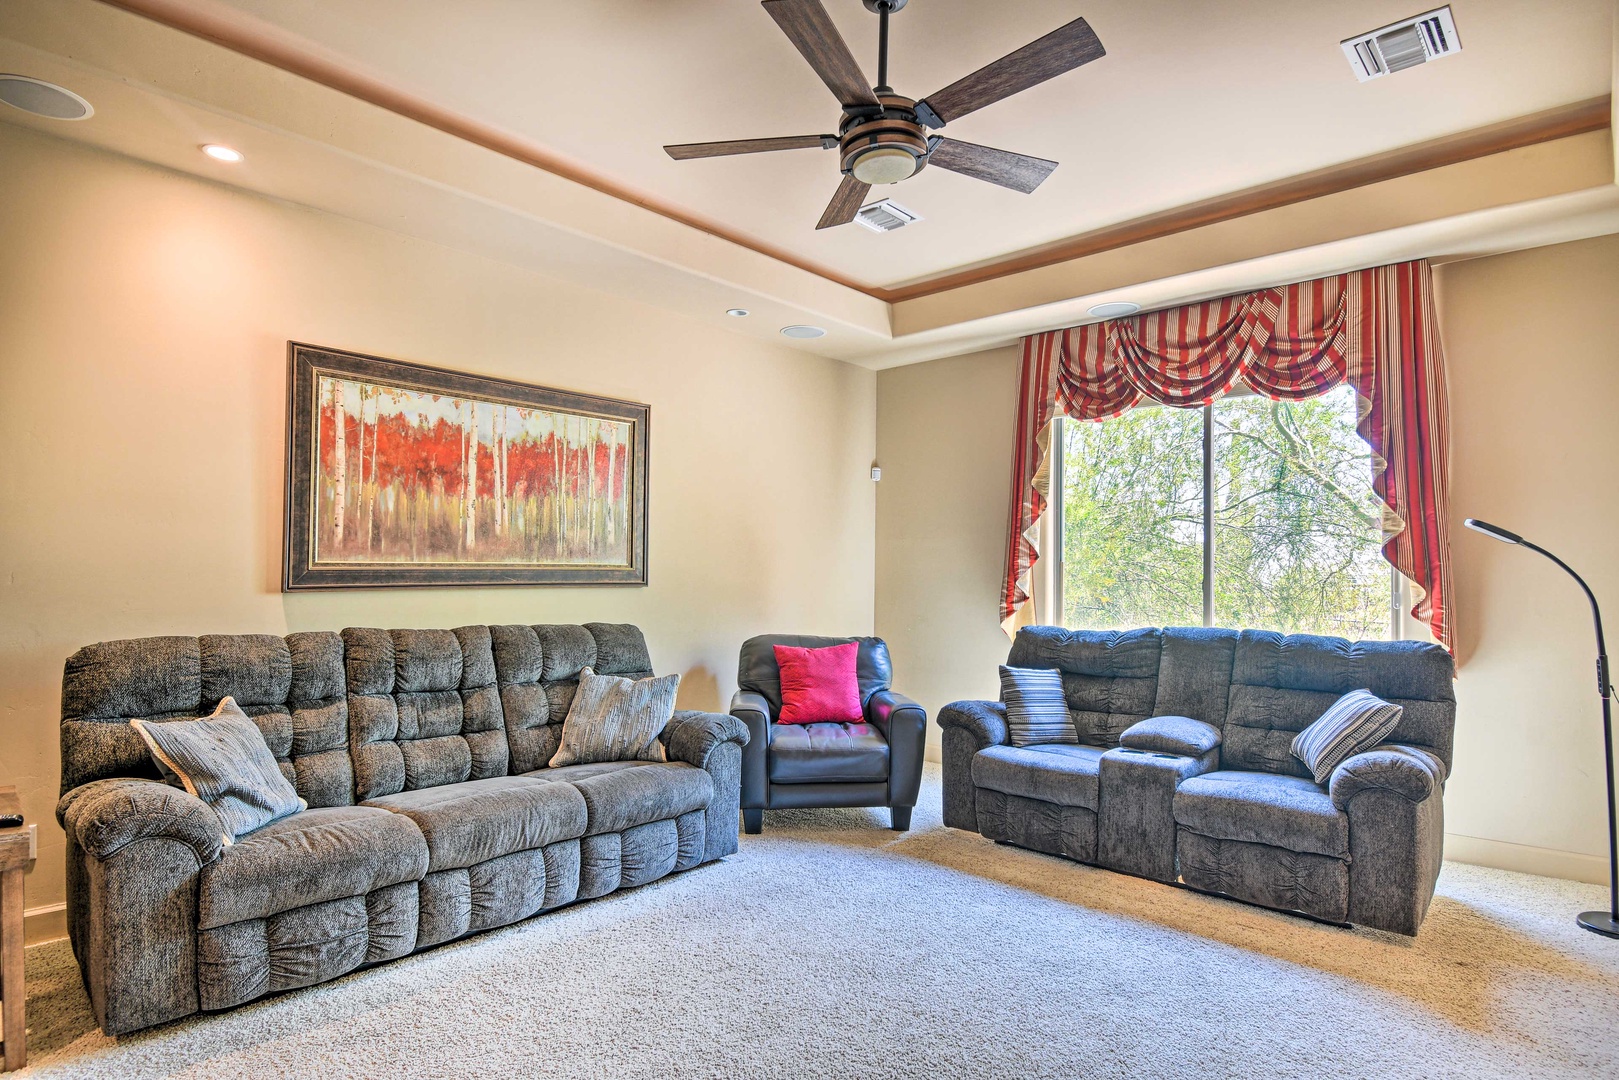 Need a break? Kick back & relax with a movie in the cozy den